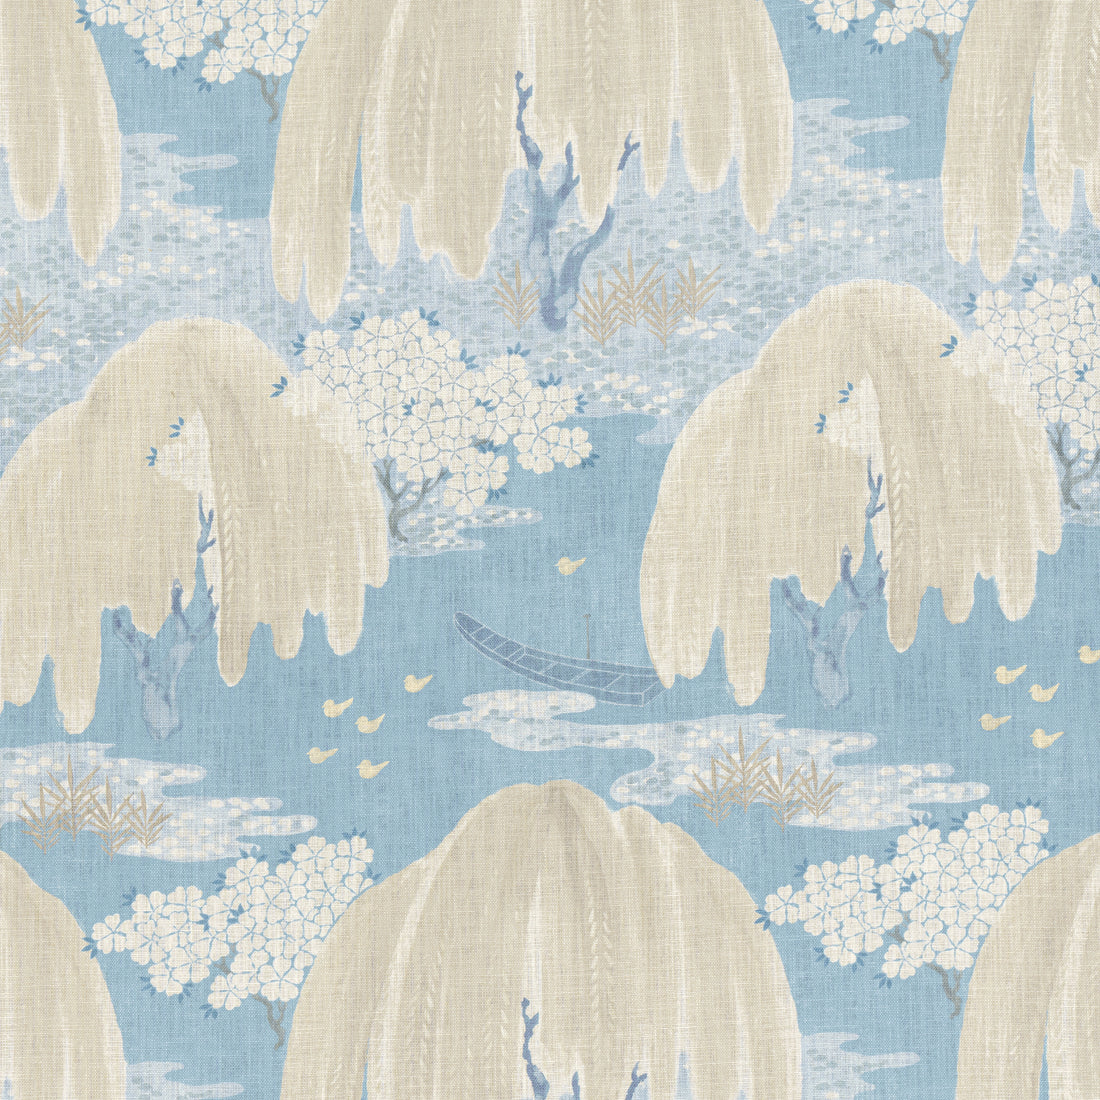 Willow Tree fabric in soft blue color - pattern number AF23108 - by Anna French in the Willow Tree collection